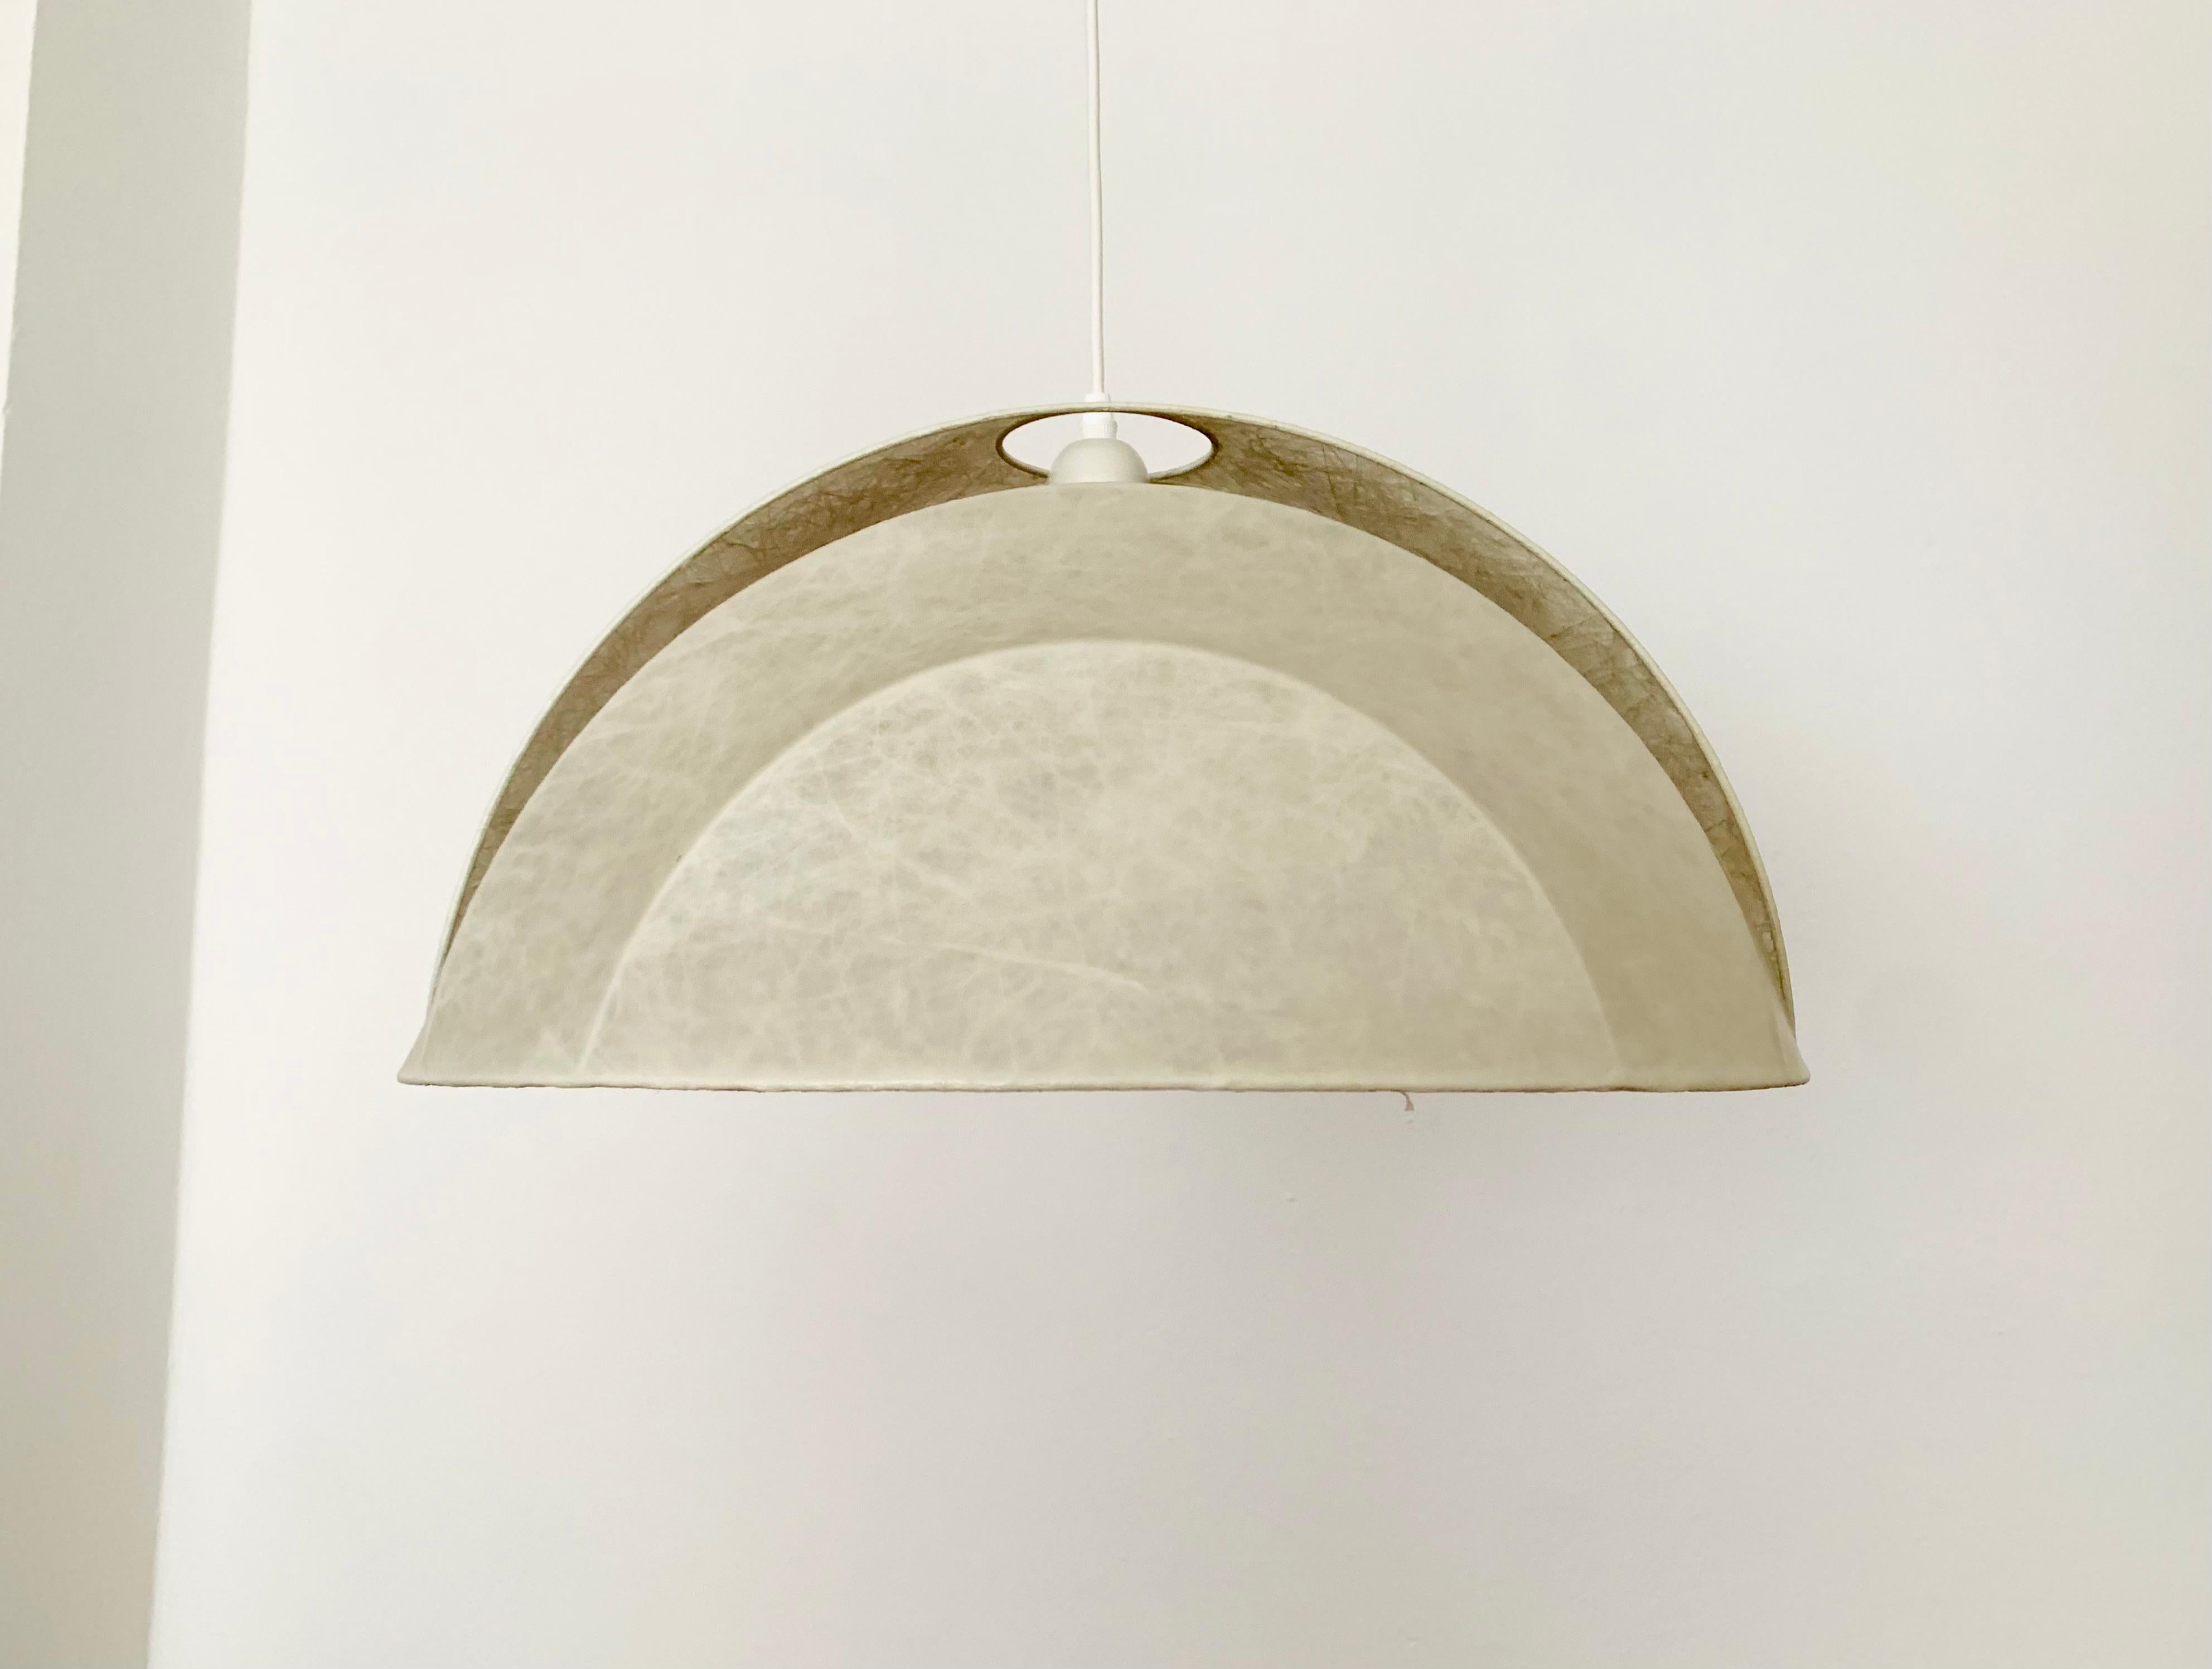 Very nice Cocoon pendant lamp from the 1960s.
Wonderful and contemporary design.
A highlight for every room.
The unusual shape creates a particularly cozy light.

Condition:

Very good vintage condition with minimal signs of wear consistent